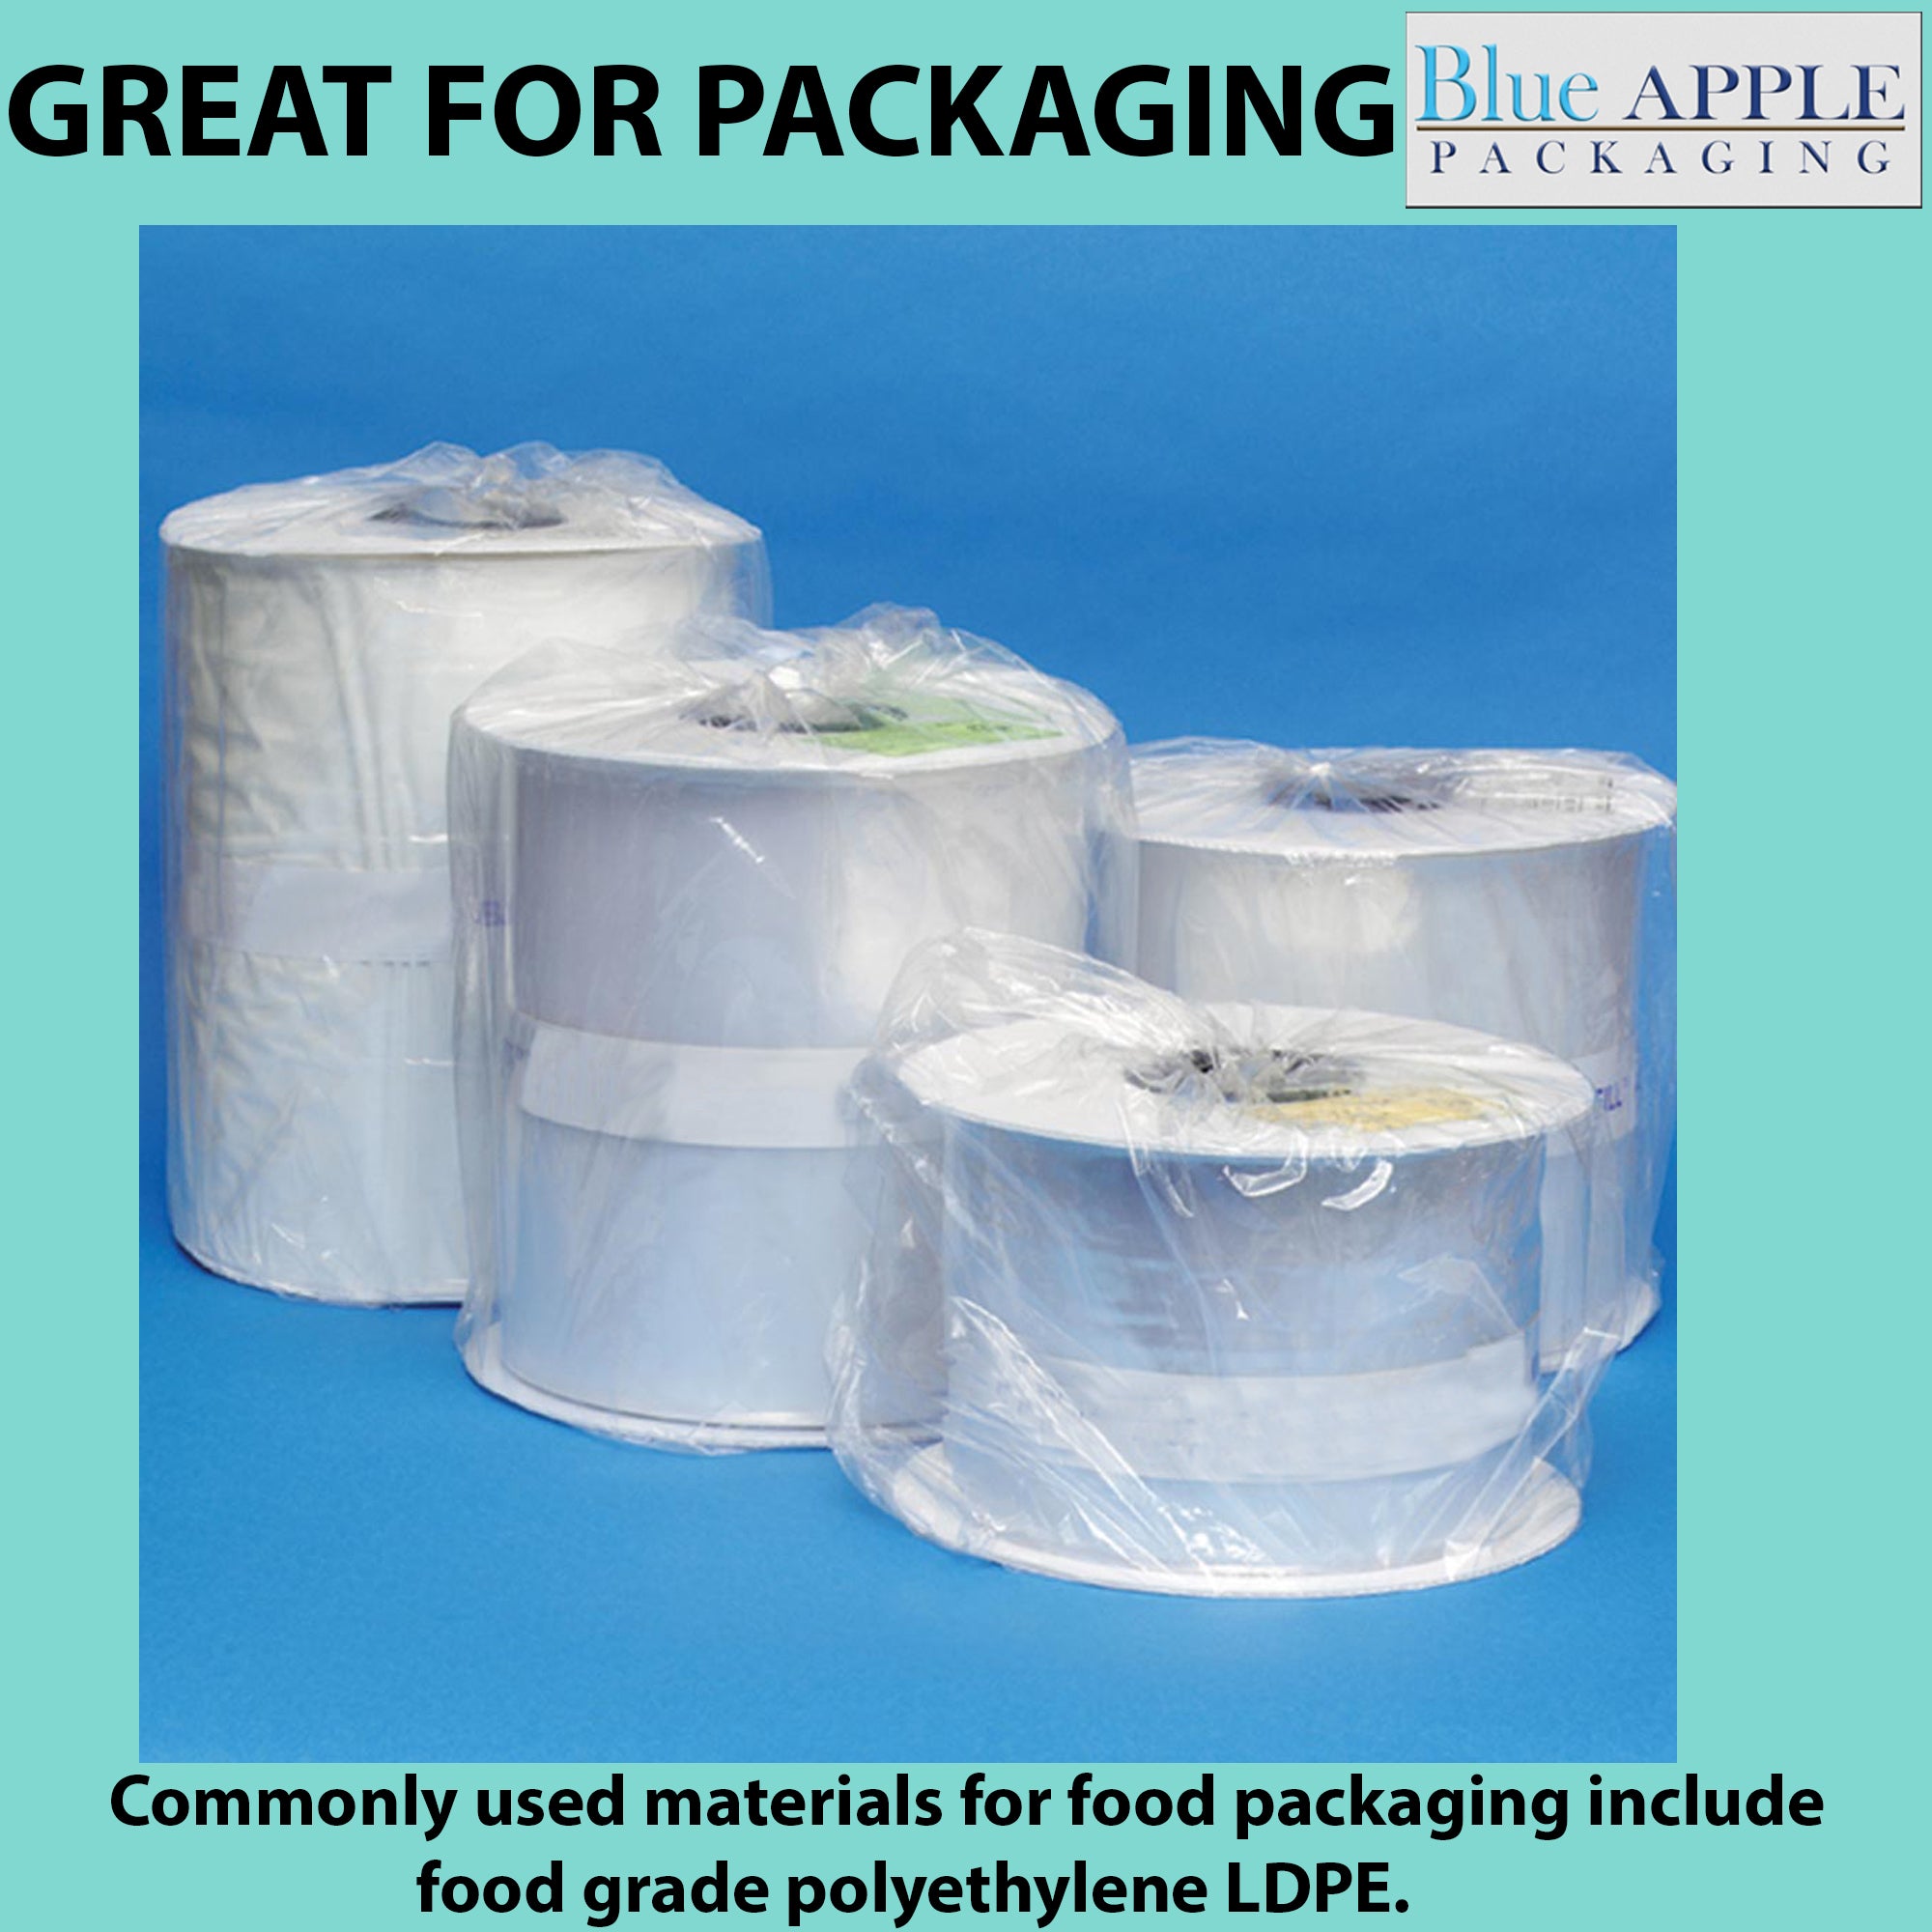 Auto Fill Poly Bags Roll 2.75 Mil, 3 inch (width) X 4 inch (height) 2000 Bags